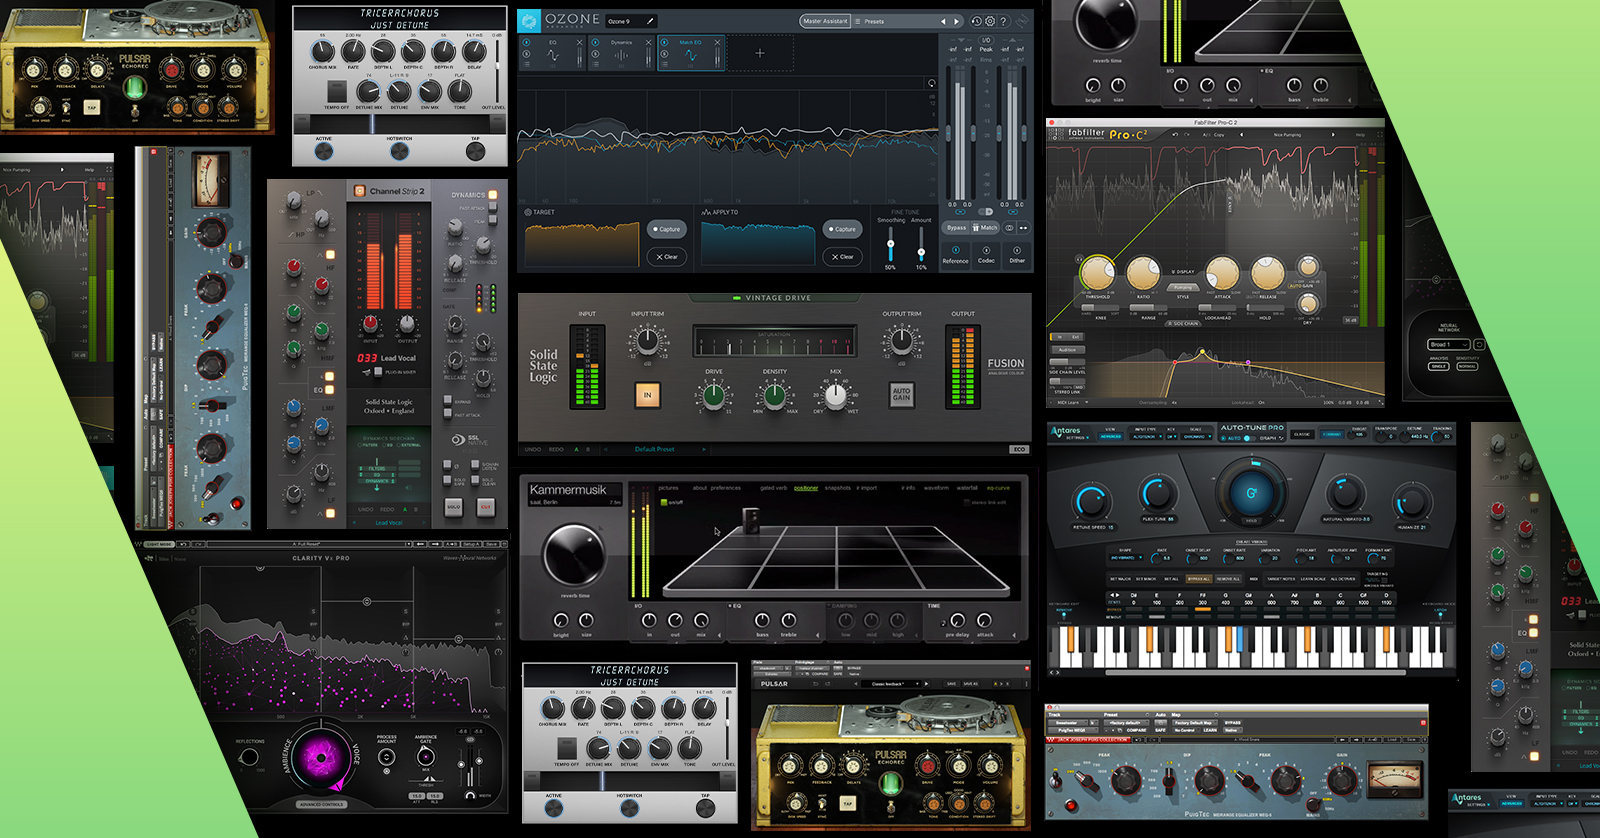 Waves Audio's Clarity Vx & Vx Pro noise reduction plugins: the ones all  others will now be judged by